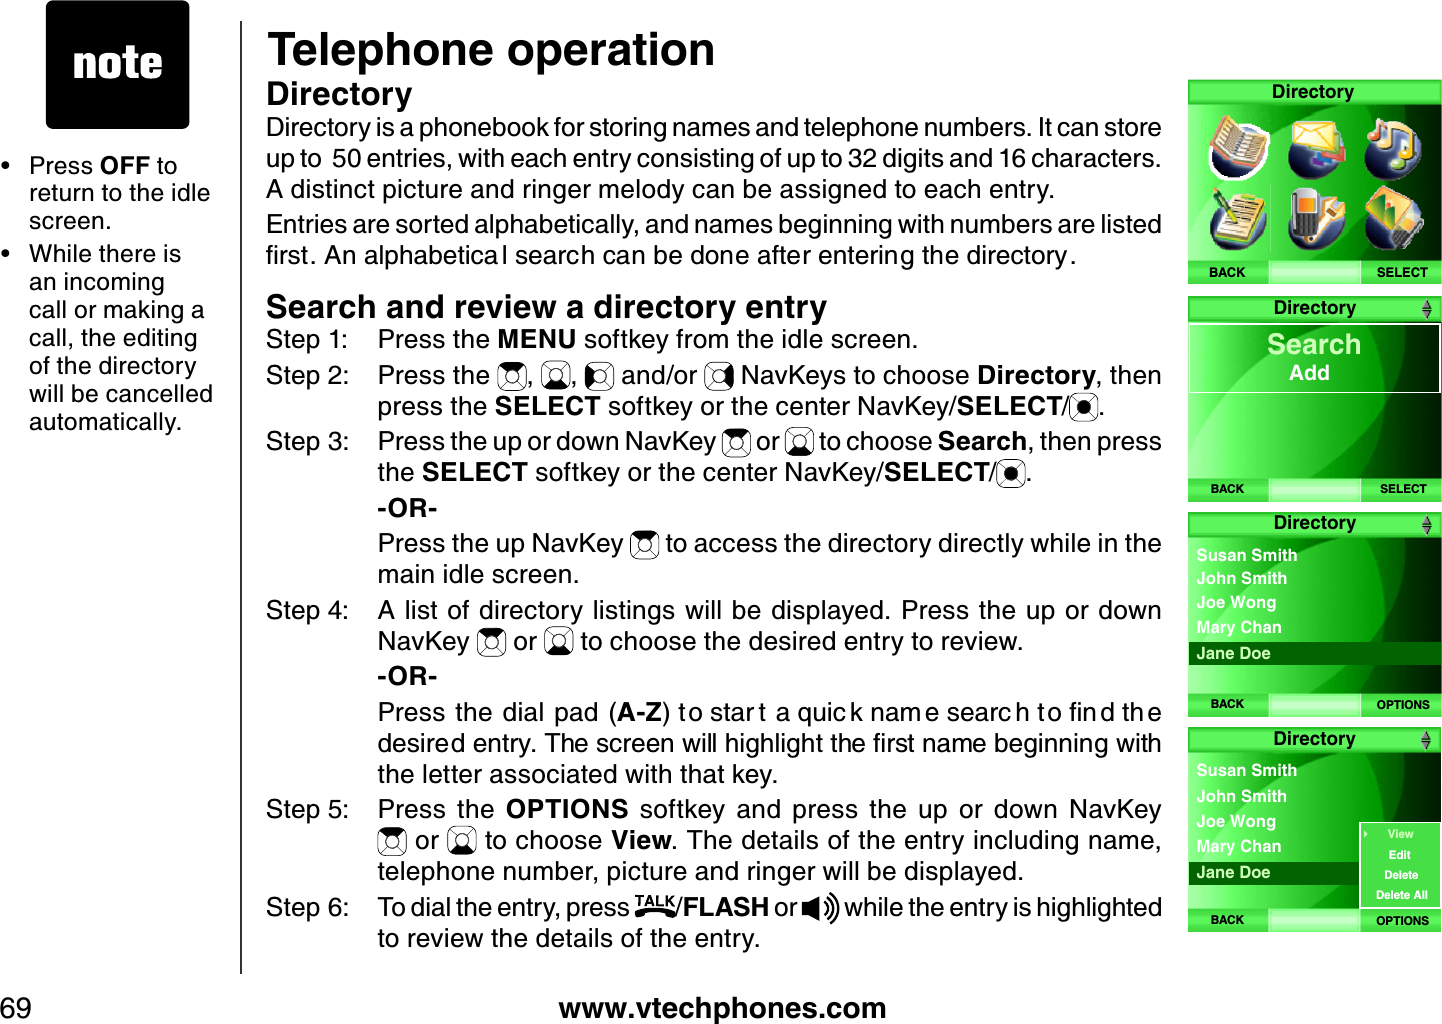 www.vtechphones.com69Telephone operationDirectoryDirectory is a phonebook for storing names and telephone numbers. It can store up to  50 entries, with each entry consisting of up to 32 digits and 16 characters. A distinct picture and ringer melody can be assigned to each entry.Entries are sorted alphabetically, and names beginning with numbers are listed ſTUV#PCNRJCDGVKEC NUGCTEJECPDGFQPGCHVGTGPVGTKPIVJGFKTGEVQT[Search and review a directory entryStep 1: Press the MENU softkey from the idle screen.Step 2: Press the  , ,  and/or   NavKeys to choose Directory, then press the SELECT softkey or the center NavKey/SELECT/.Step 3: Press the up or down NavKey   or   to choose Search, then press the SELECT softkey or the center NavKey/SELECT/.    -OR-    Press the up NavKey   to access the directory directly while in the main idle screen.Step 4: A list of directory listings will be displayed. Press the up or down NavKey   or   to choose the desired entry to review.     -OR-    Press the dial pad (A-ZV QUVCT VCSWKE MPCO GUGCTE JVQſP FVJ GFGUKTGFGPVT[6JGUETGGPYKNNJKIJNKIJVVJGſTUVPCOGDGIKPPKPIYKVJthe letter associated with that key.Step 5: Press  the  OPTIONS  softkey  and  press  the  up  or  down  NavKey  or   to choose View. The details of the entry including name, telephone number, picture and ringer will be displayed. Step 6: To dial the entry, press  /FLASH or   while the entry is highlighted to review the details of the entry.Press OFF to return to the idle screen.While there is an incoming call or making a call, the editing of the directory will be cancelled automatically. ••SELECTDirectoryBACKDirectoryBACK SELECT Search      AddDirectoryBACK OPTIONSJoe Wong Susan SmithMary Chan John SmithJane DoeDirectoryBACK OPTIONSJoe Wong Susan SmithMary Chan John SmithJane DoeViewEditDeleteDelete All